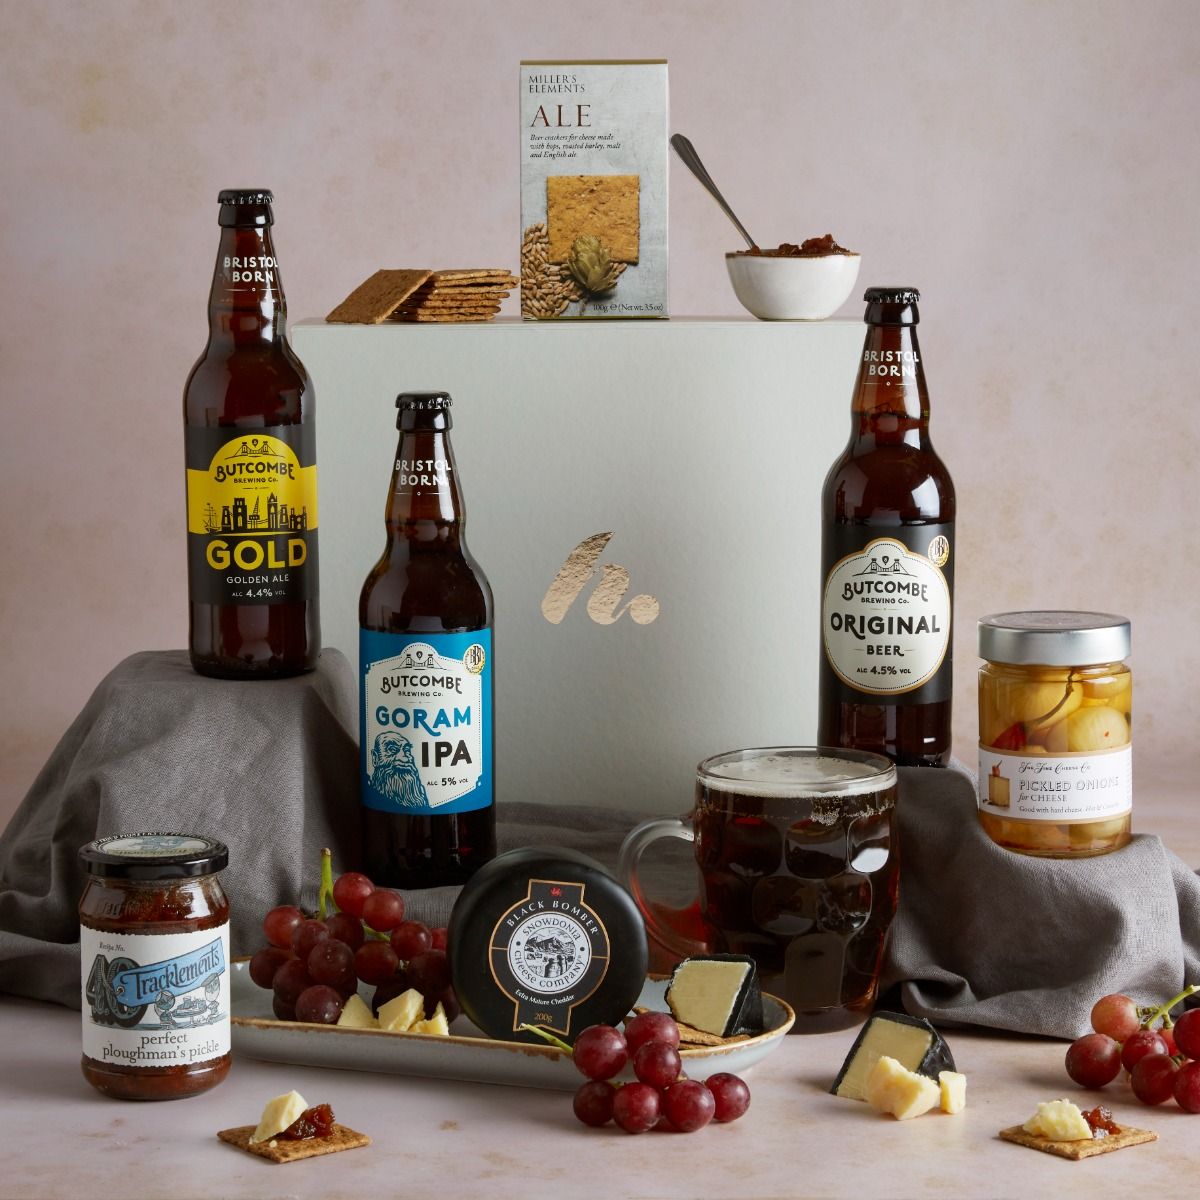 Ploughman's Beer Hamper with contents on display and including signature gift box